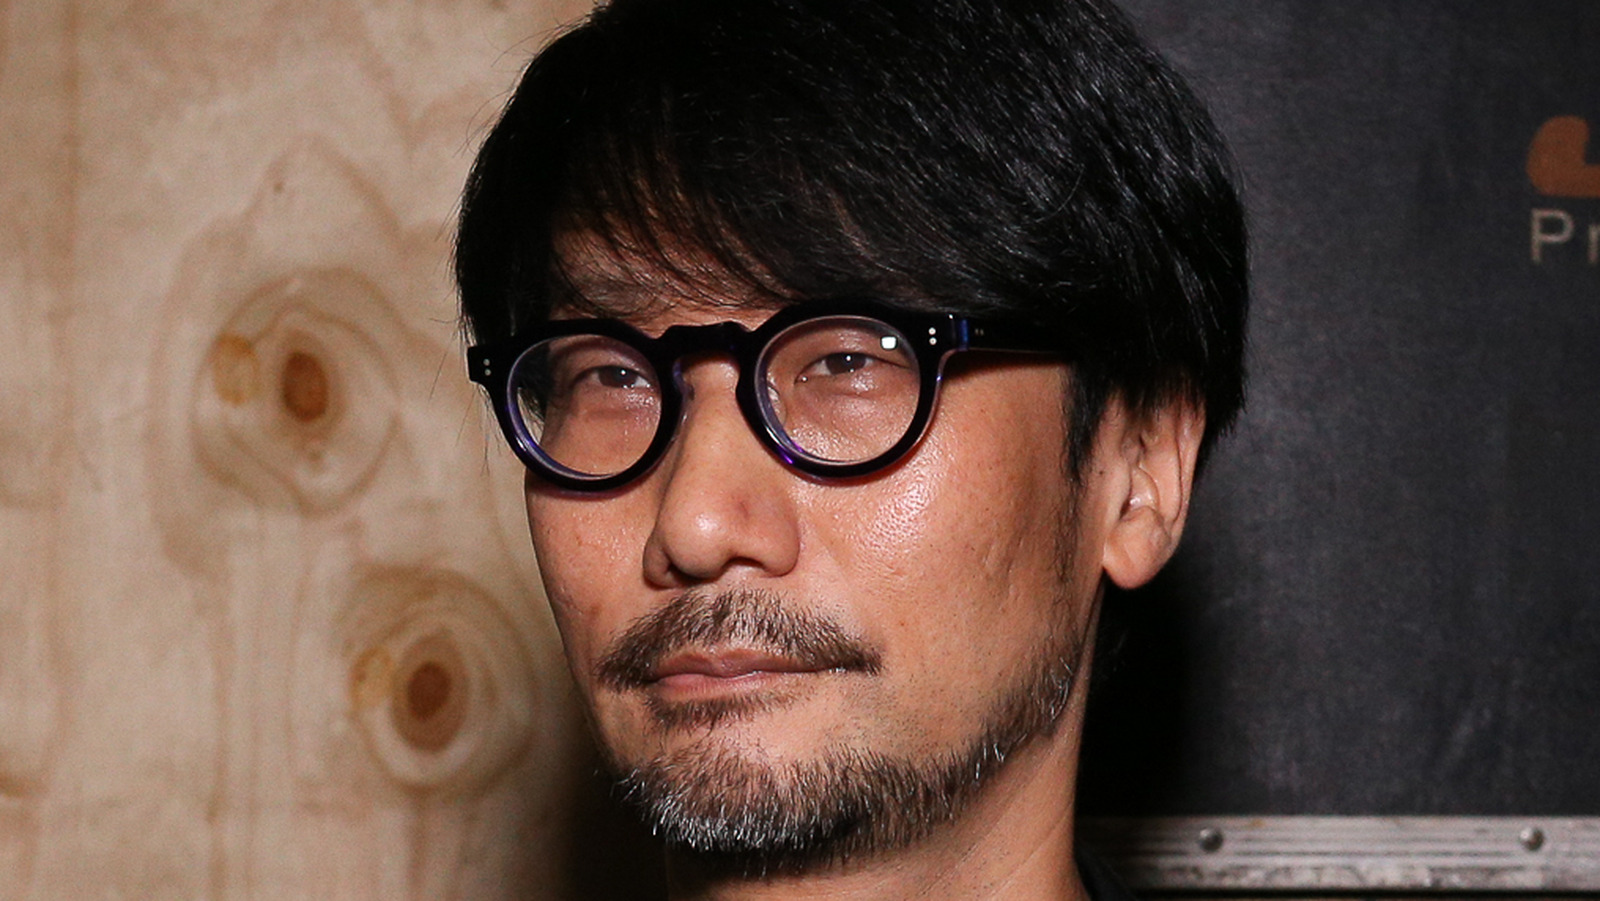 A New Horror Game From Hideo Kojima Has Reportedly Been Leaked